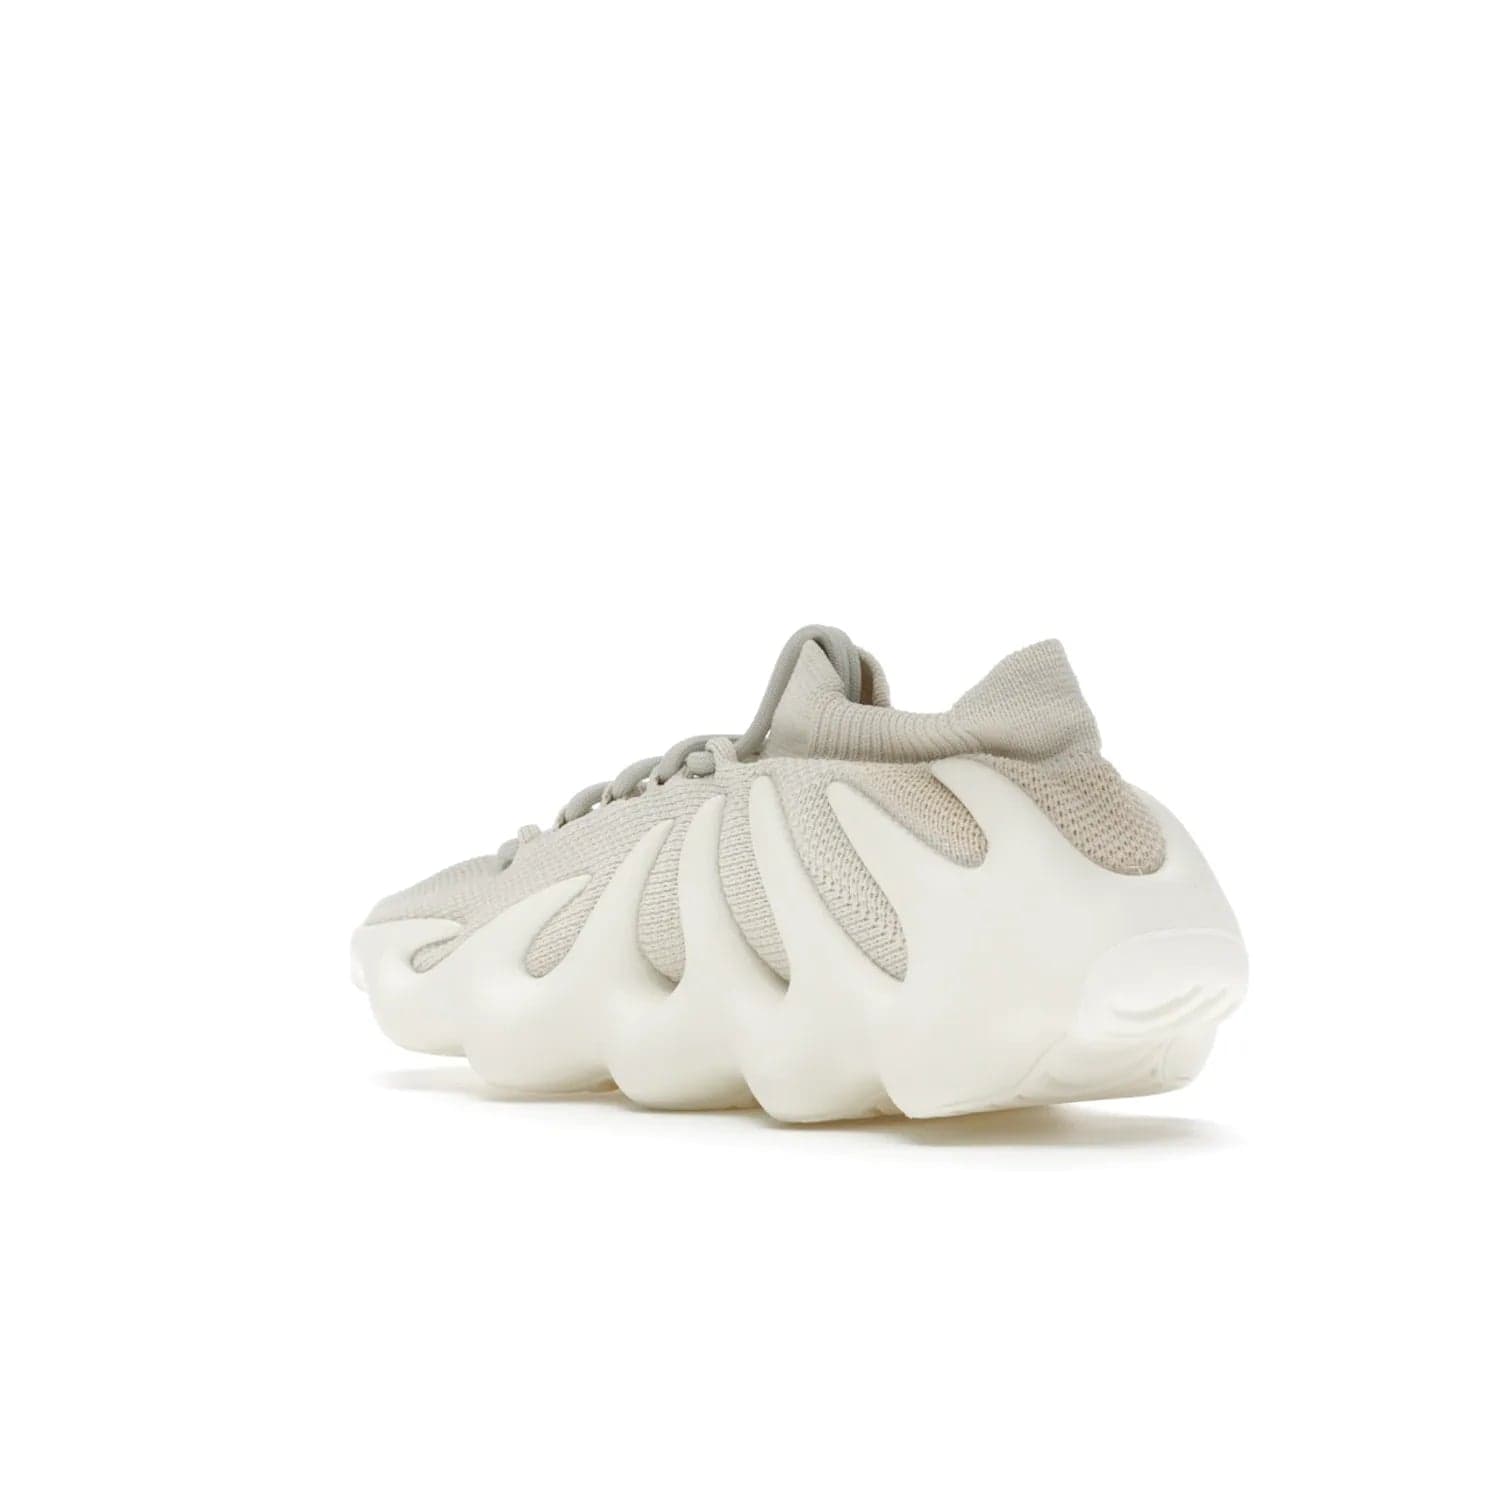 adidas Yeezy 450 Cloud White - Image 24 - Only at www.BallersClubKickz.com - Experience the future with the adidas Yeezy 450 Cloud White. A two-piece design featuring an extreme foam sole and mesh upper, this silhouette is expected to release in March 2021. Get your hands on this striking Cloud White/Cloud White colorway and stand out in the crowd.